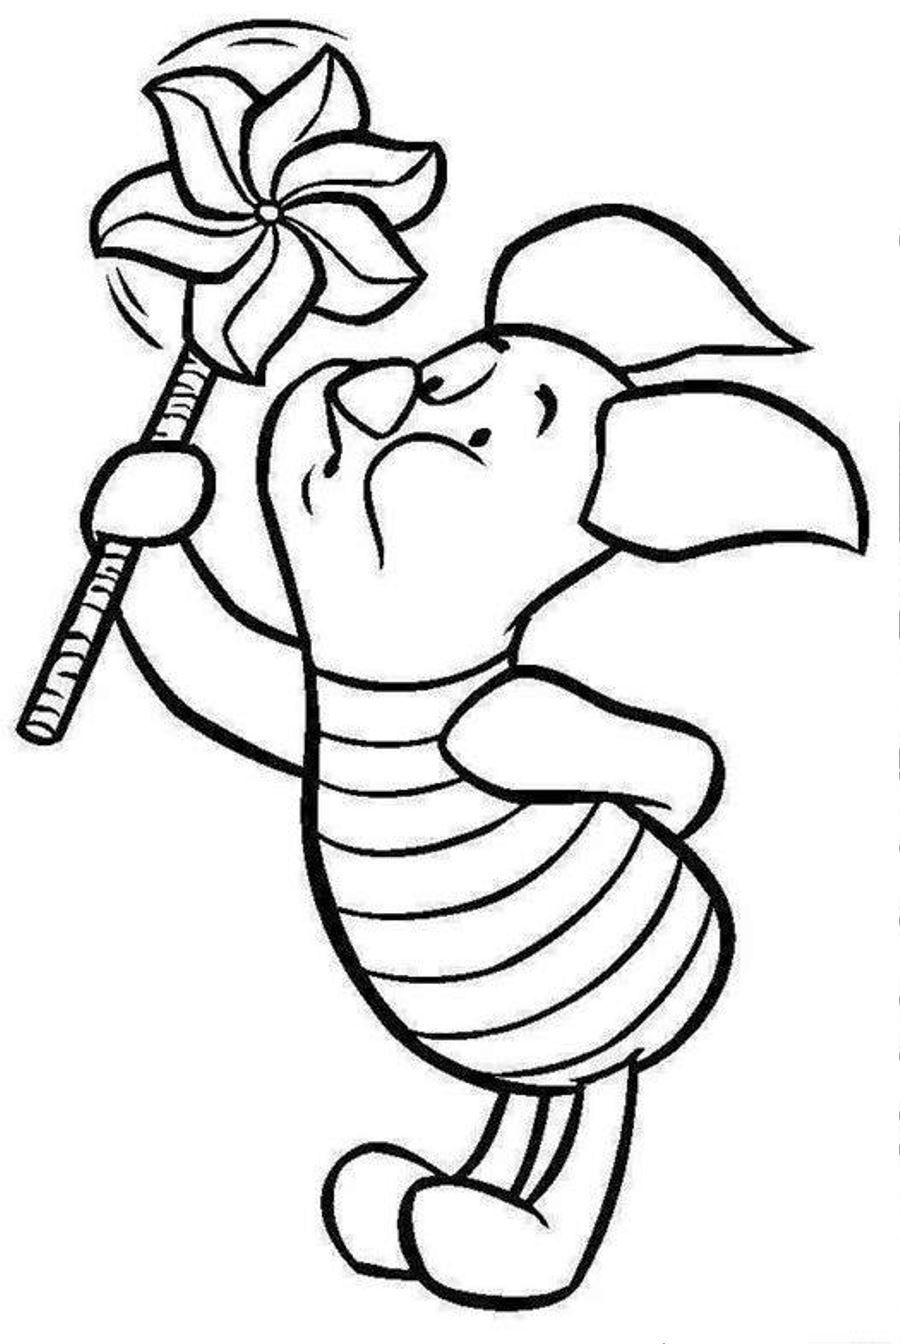 Download Winnie The Pooh Pictures Coloring Pages | Cooloring.com ...